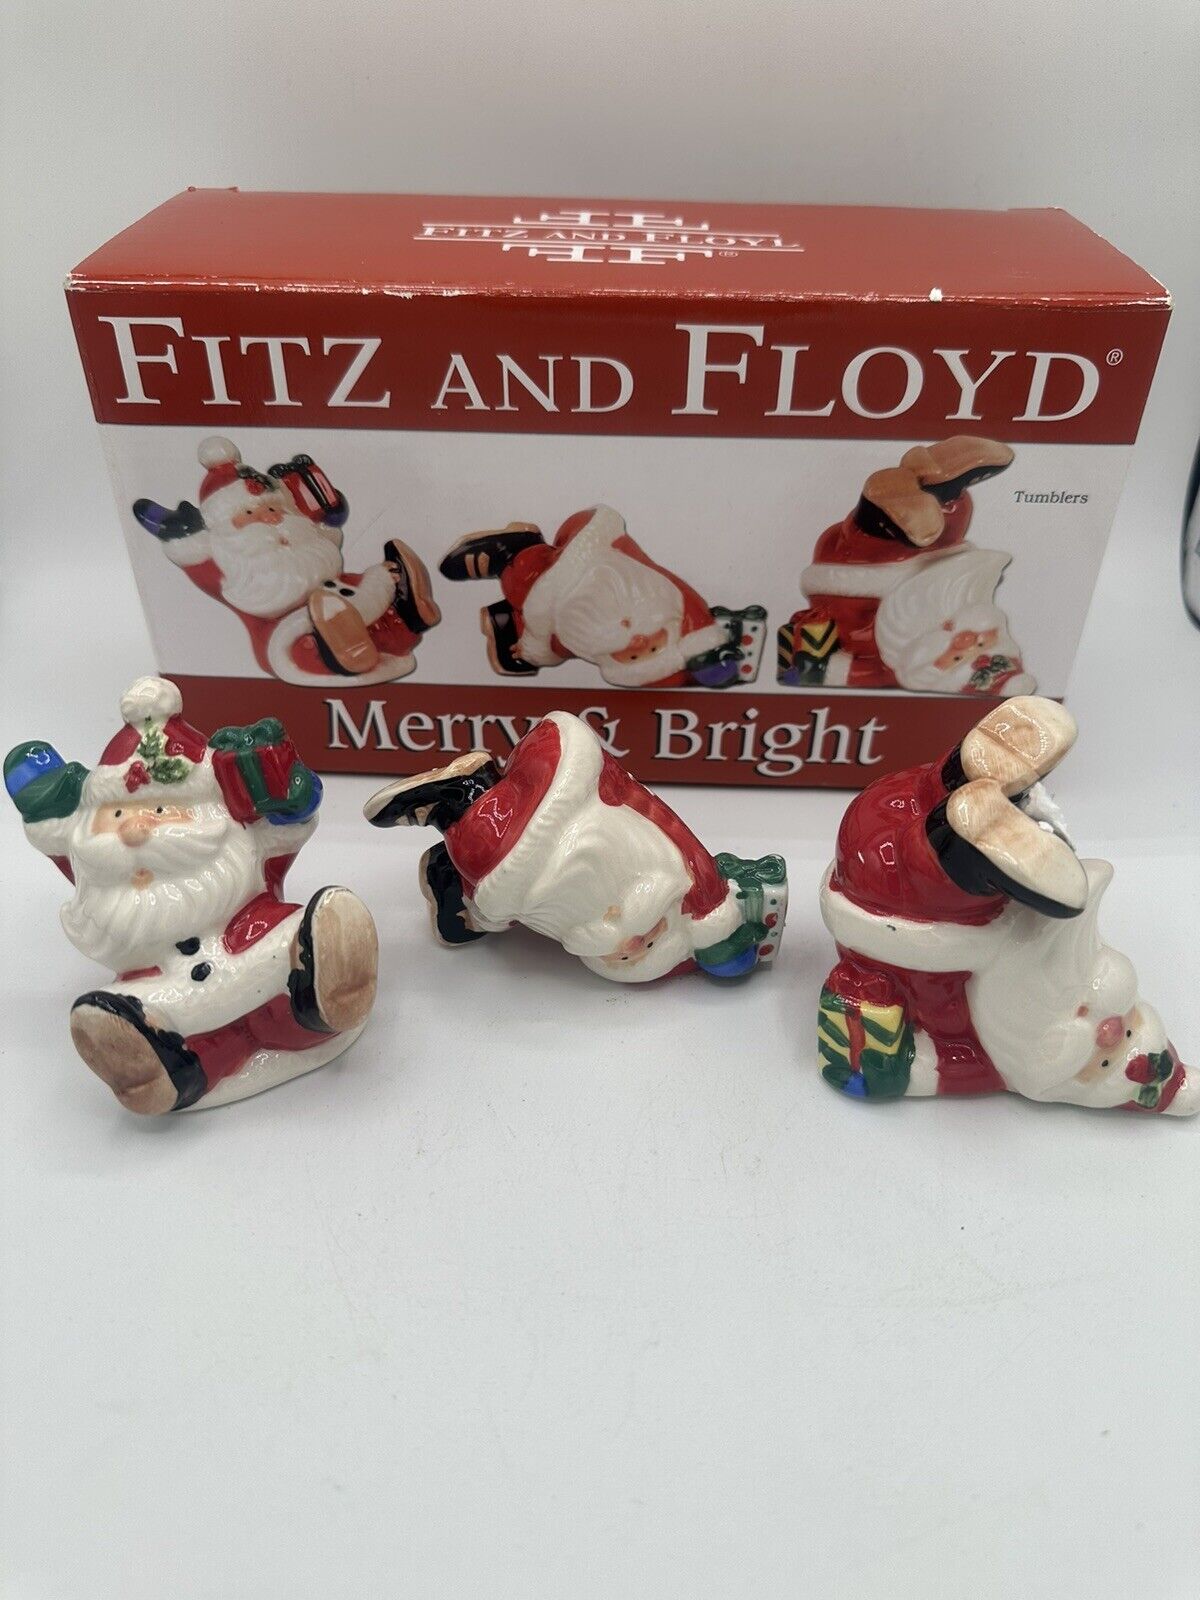 Fitz and Floyd Merry & Bright Holiday Santa 3 Tumblers